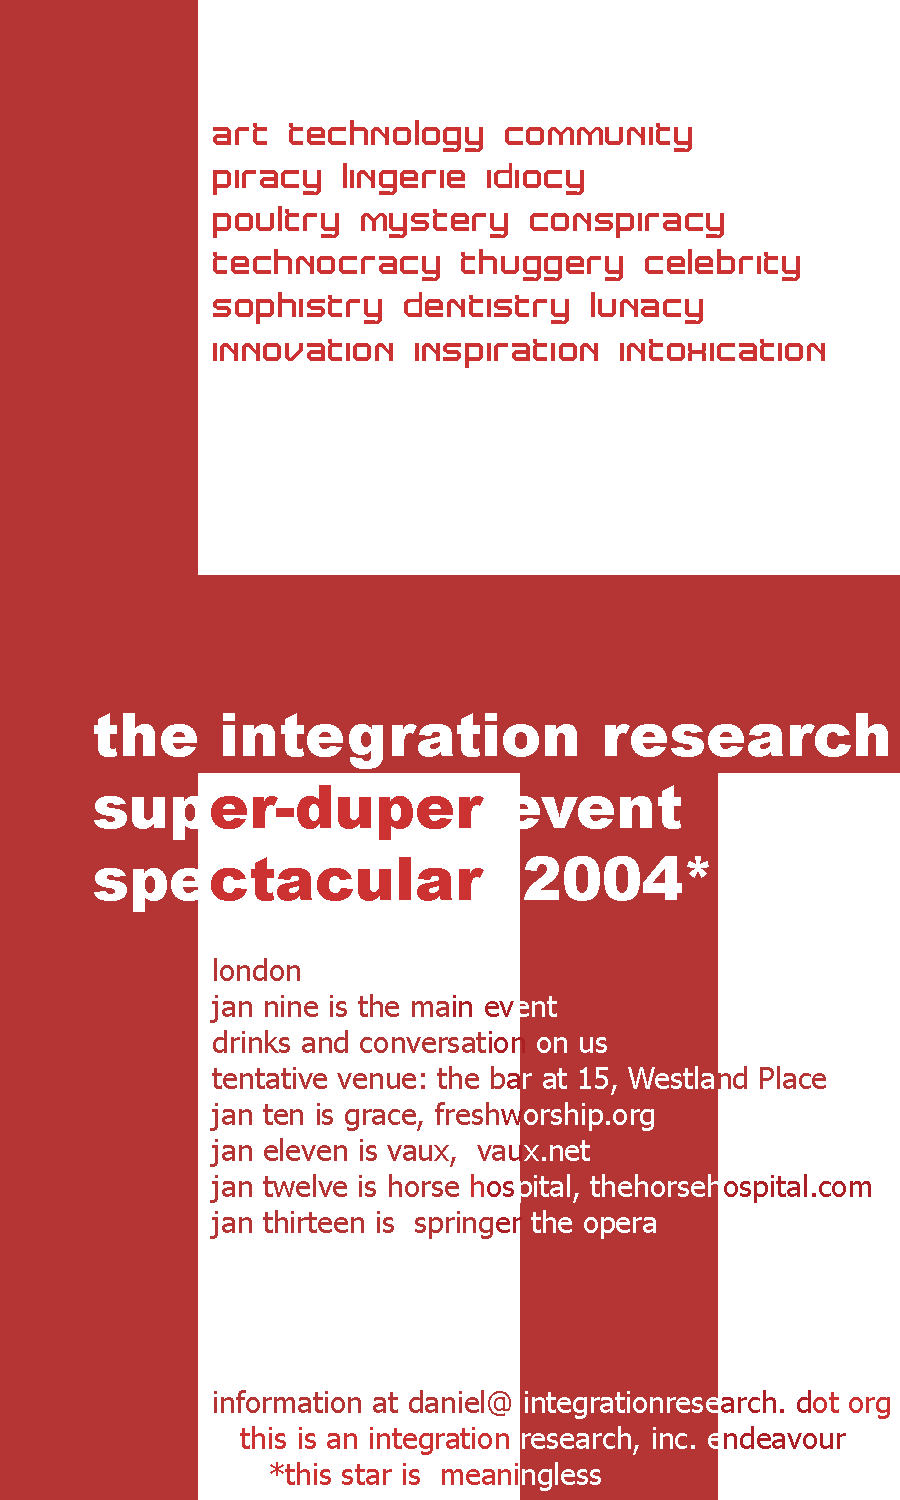 Integration Research London launch event flyer